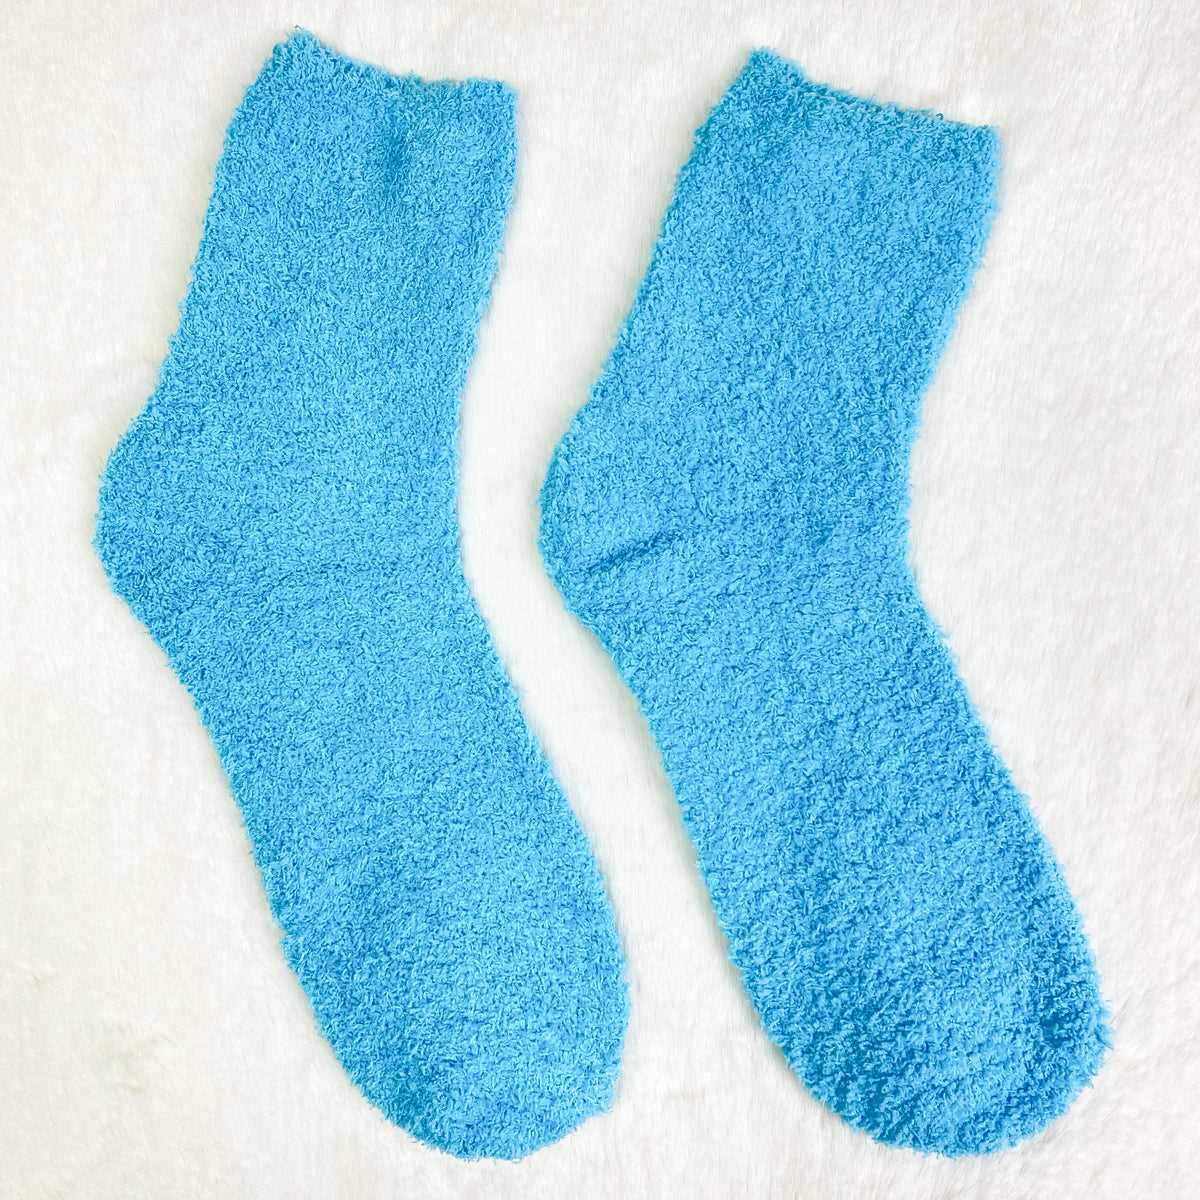 Step 4: Separate Socks with Embellishments